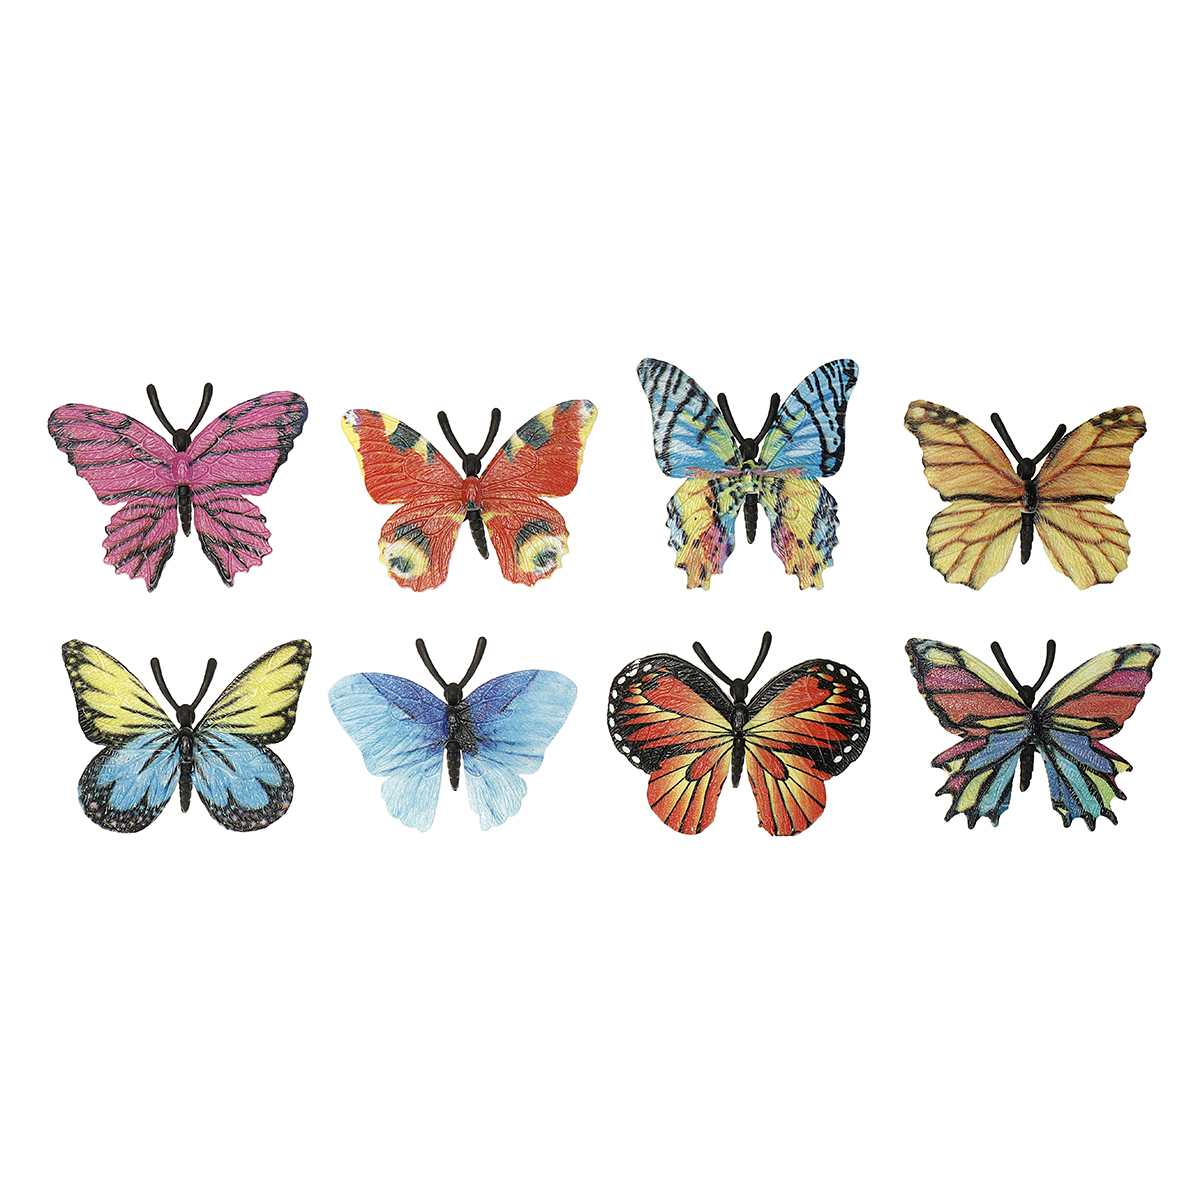 14-Pcs-High-Simulation-Colorful-Realistic-Insects-Butterfly-Animal-Figure-Doll-Model-Learning-Educat-1851298-9